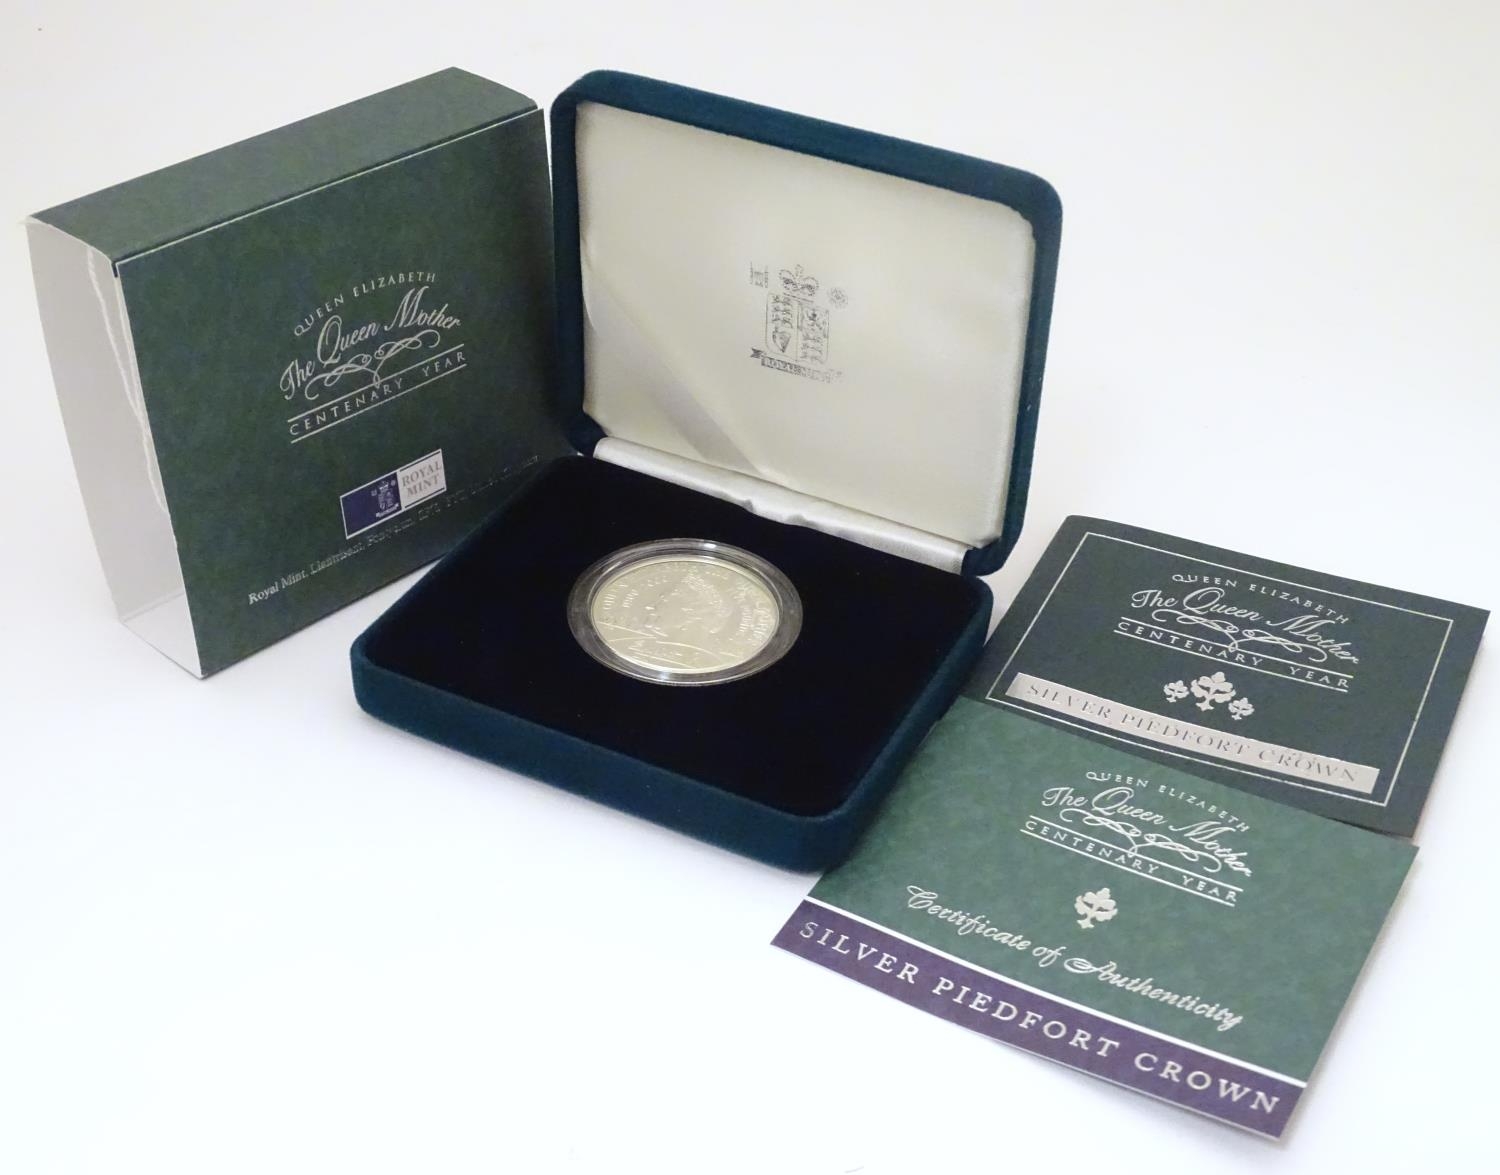 Coin: A Royal Mint 2000, sterling silver five pound piedfort proof crown coin, commemorating the